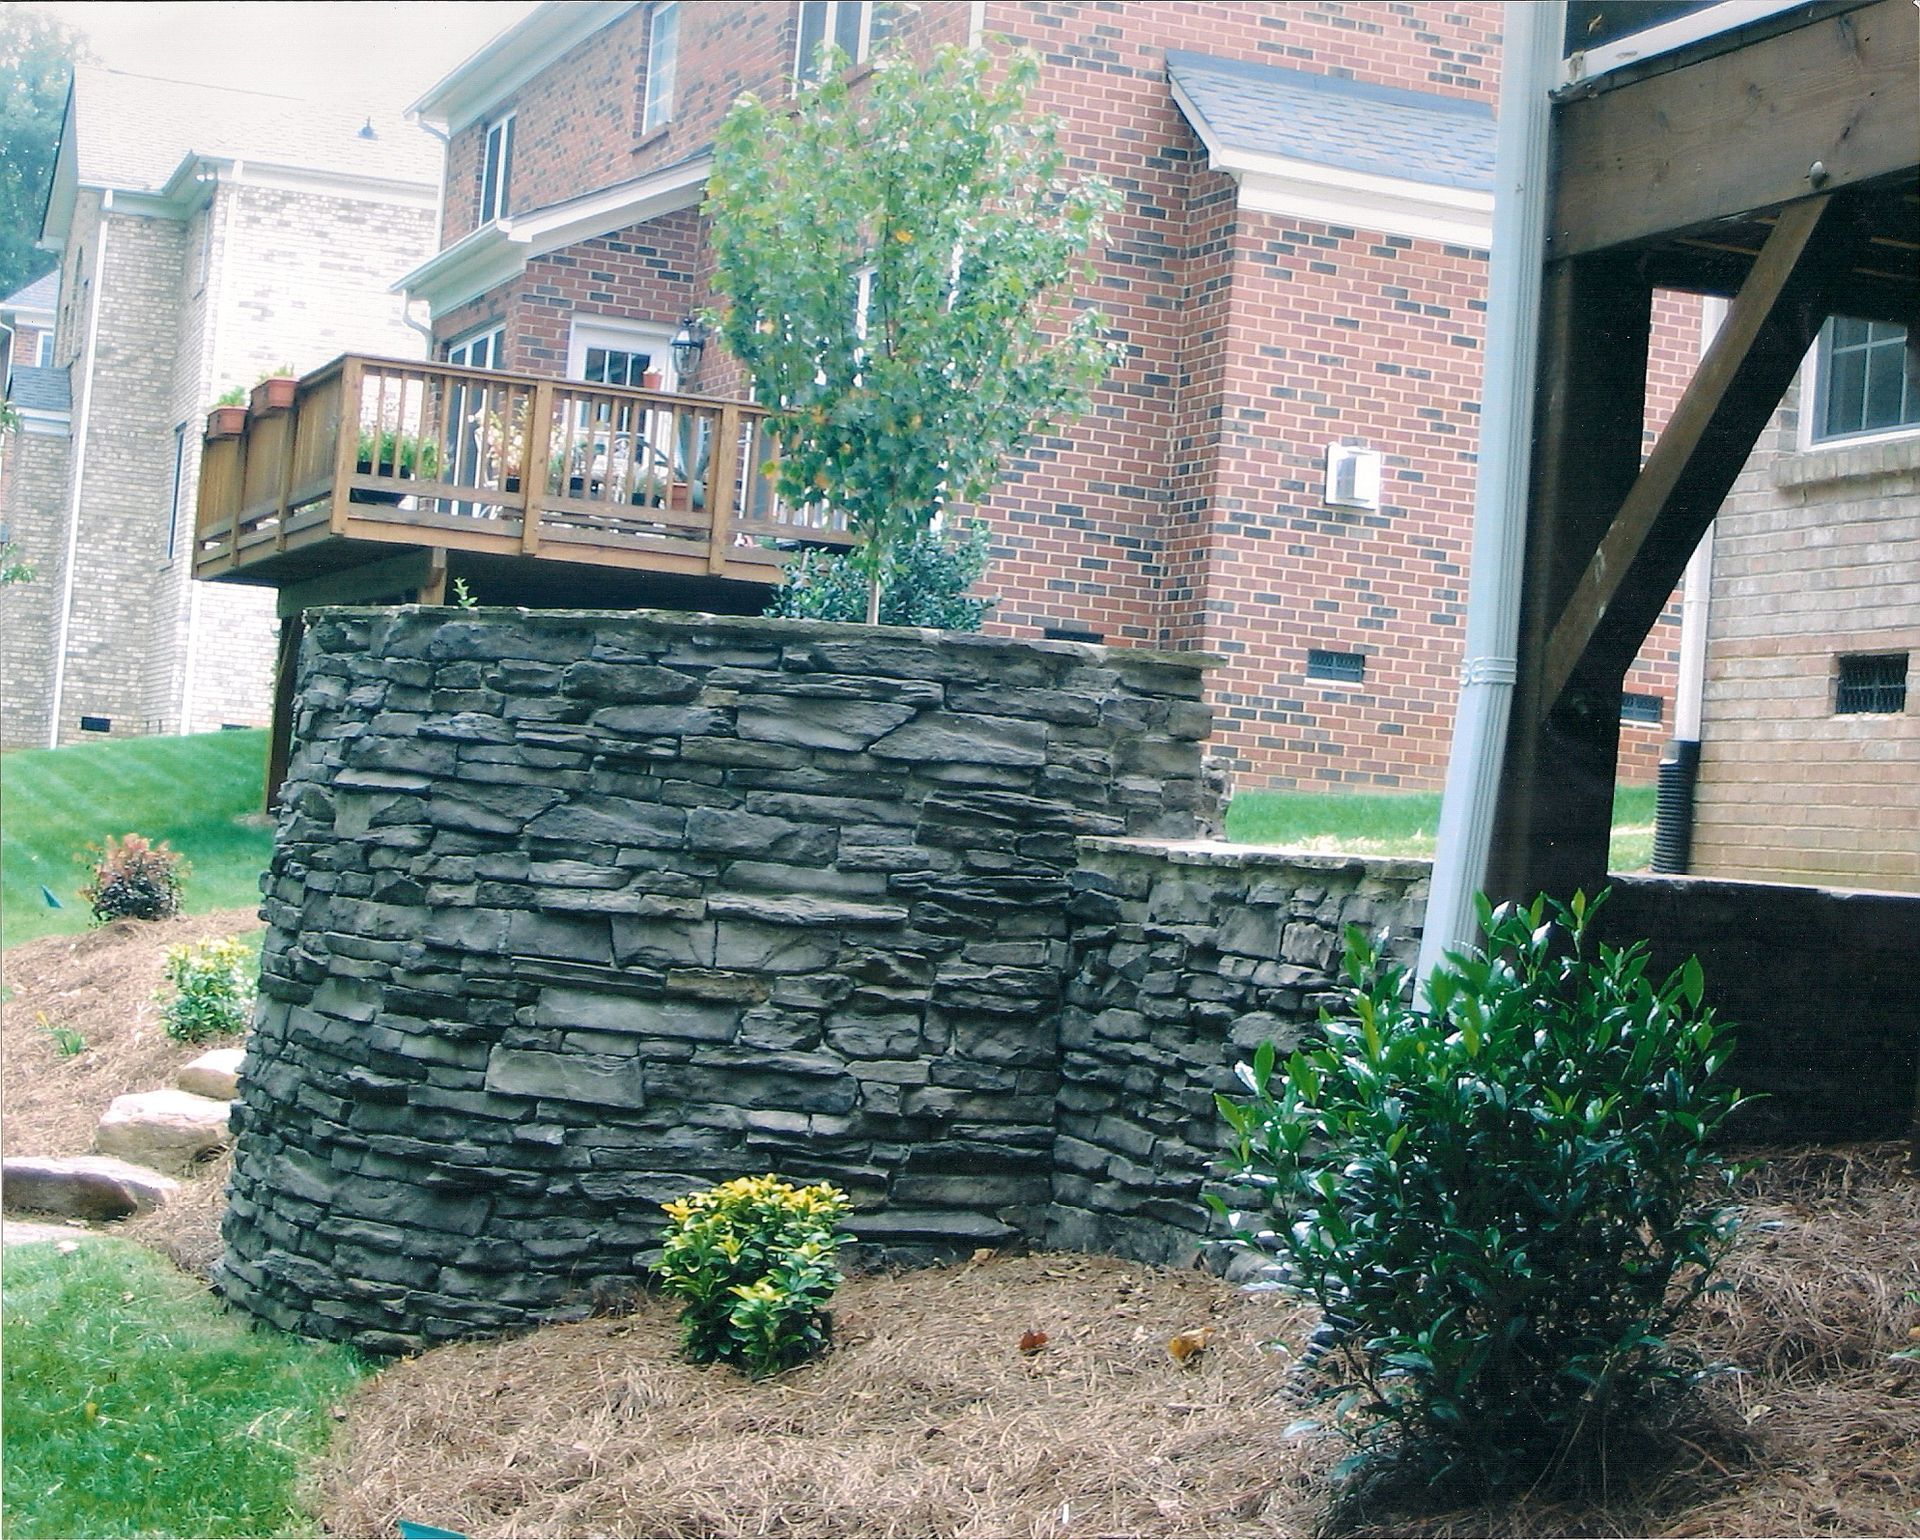 A stone wall with a wooden deck in the background